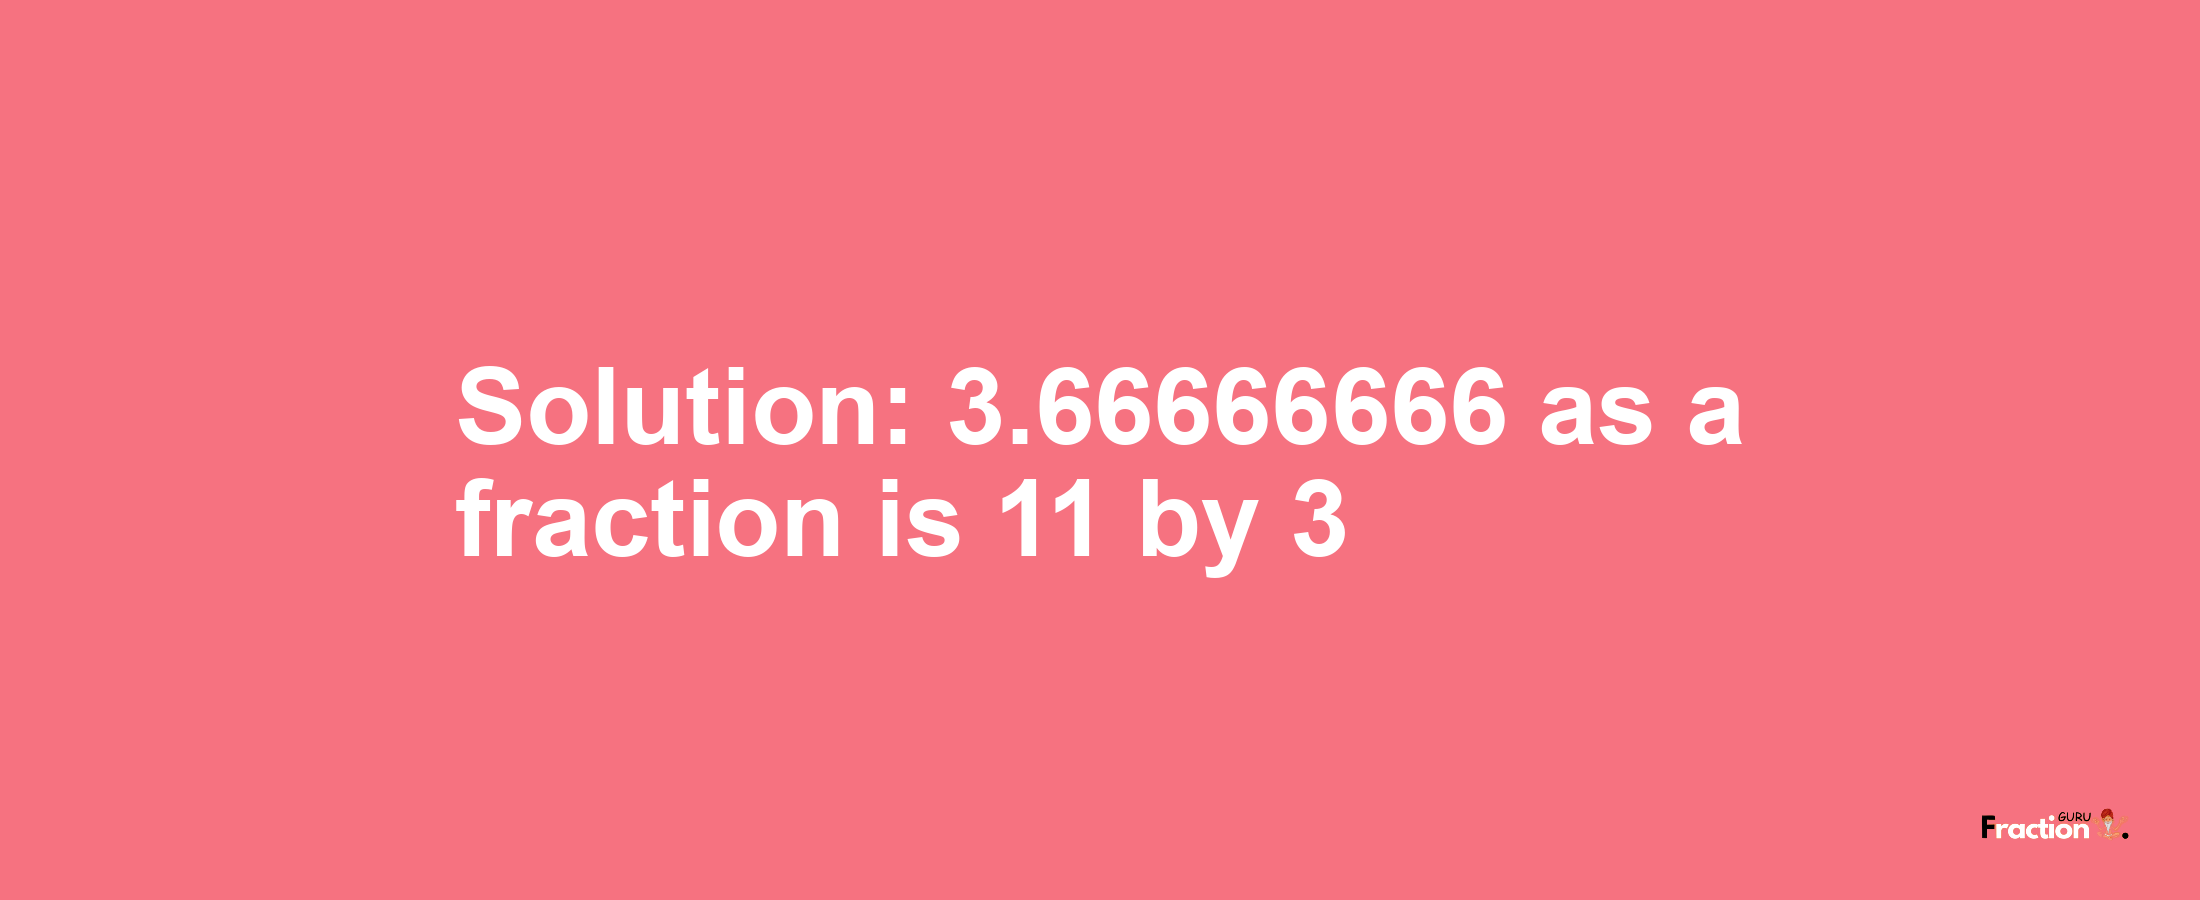 Solution:3.66666666 as a fraction is 11/3